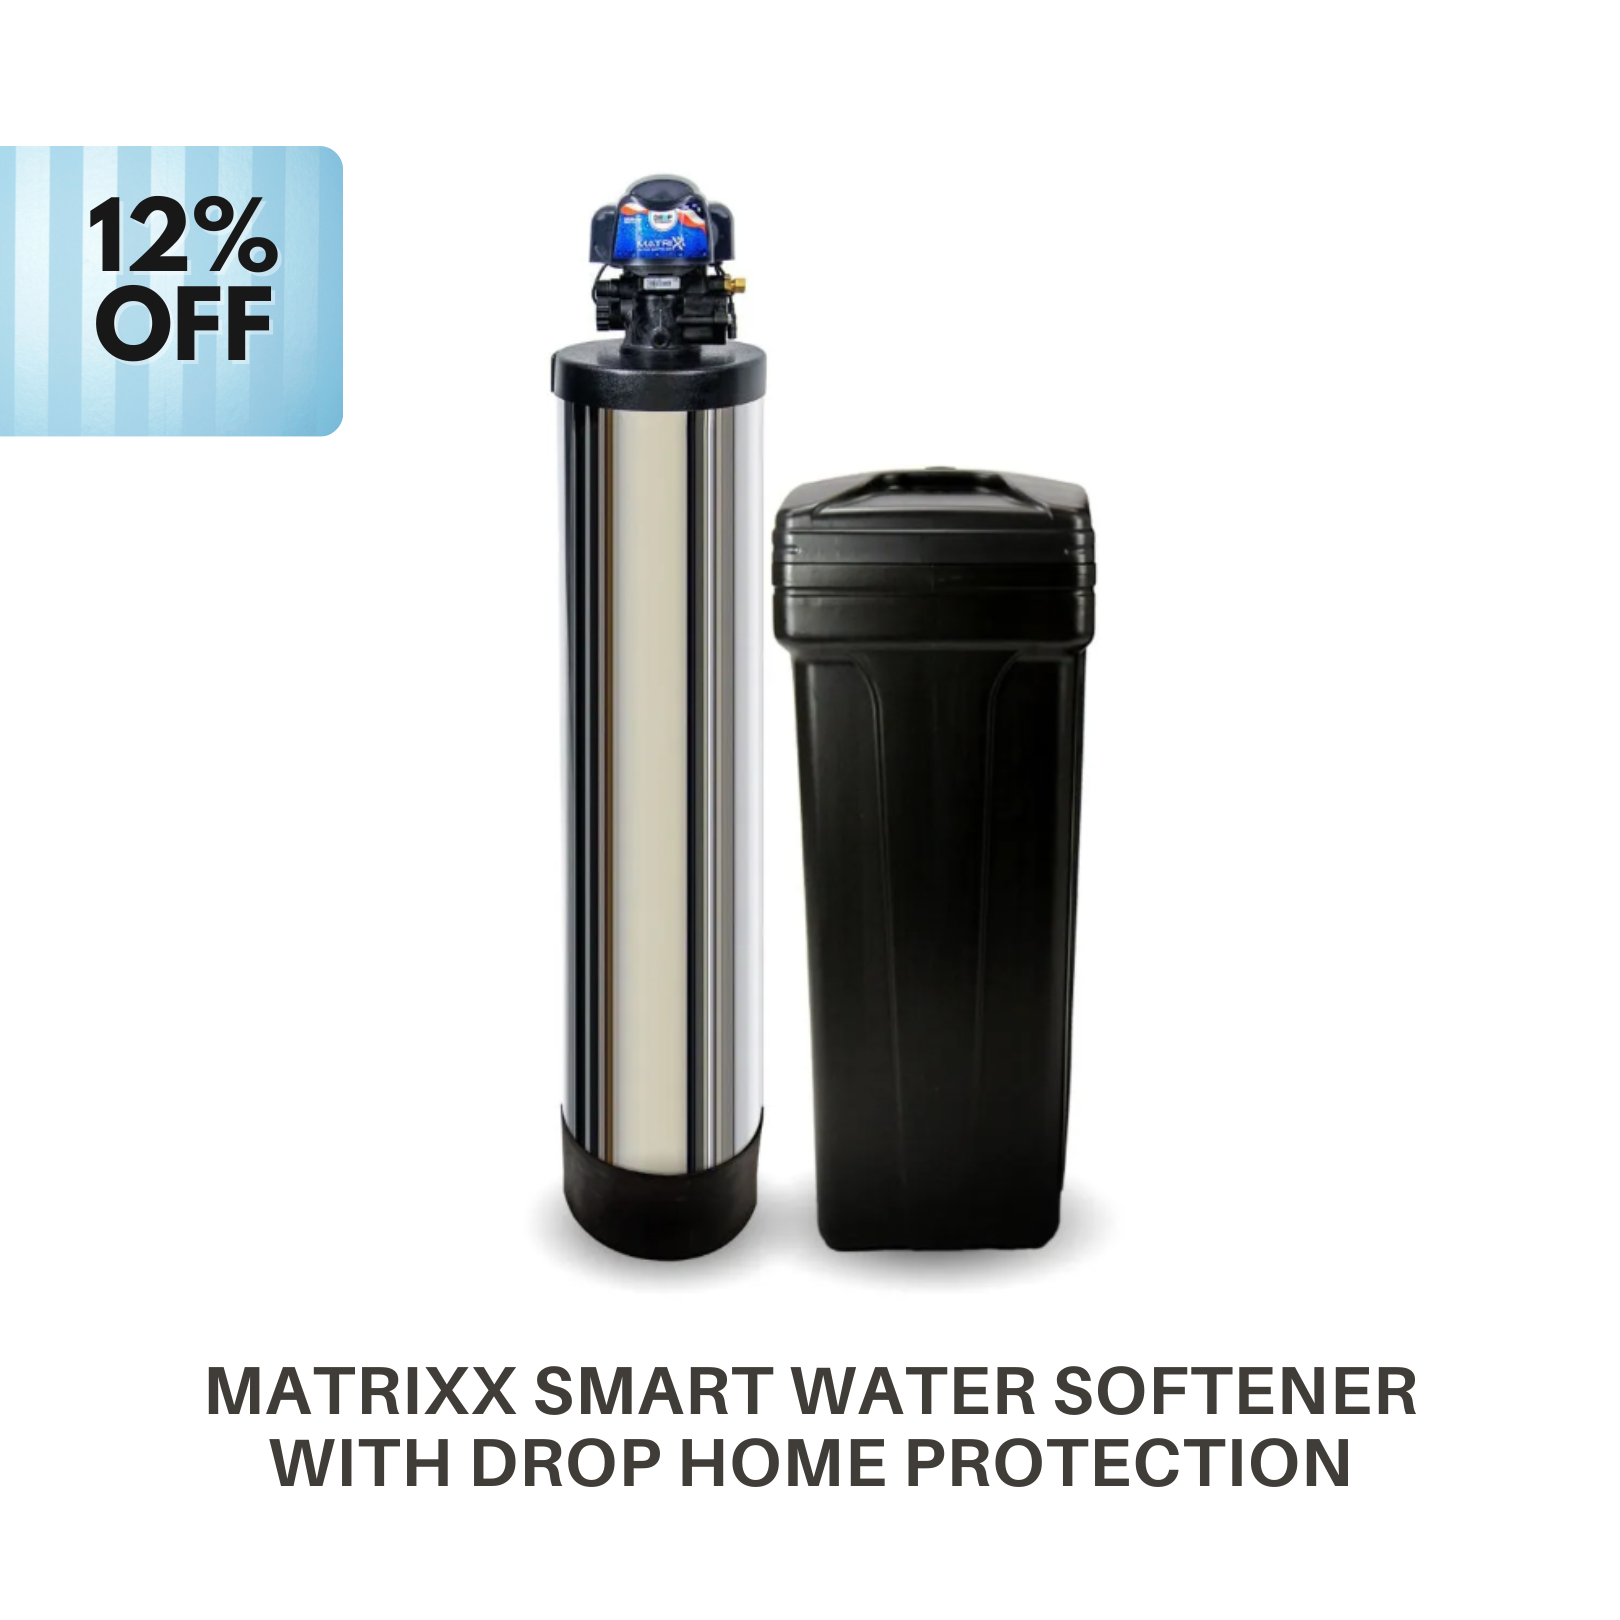 matrixx smart water softener with drop leak detection home protection technology